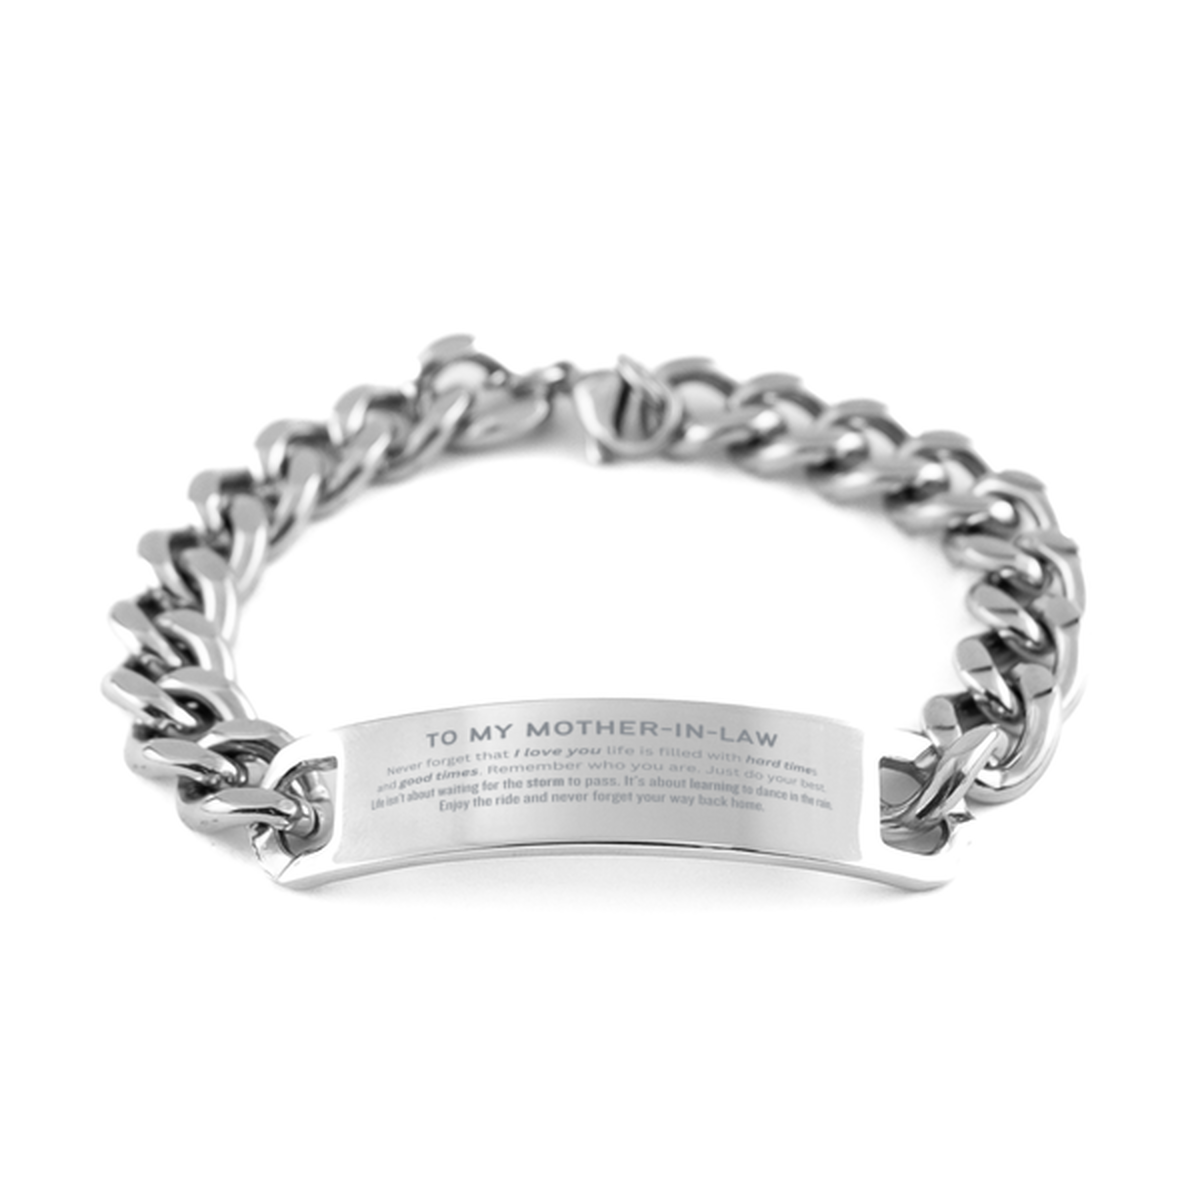 Christmas Mother-In-Law Cuban Chain Stainless Steel Bracelet Gifts, To My Mother-In-Law Birthday Thank You Gifts For Mother-In-Law, Graduation Unique Gifts For Mother-In-Law To My Mother-In-Law Never forget that I love you life is filled with hard times a